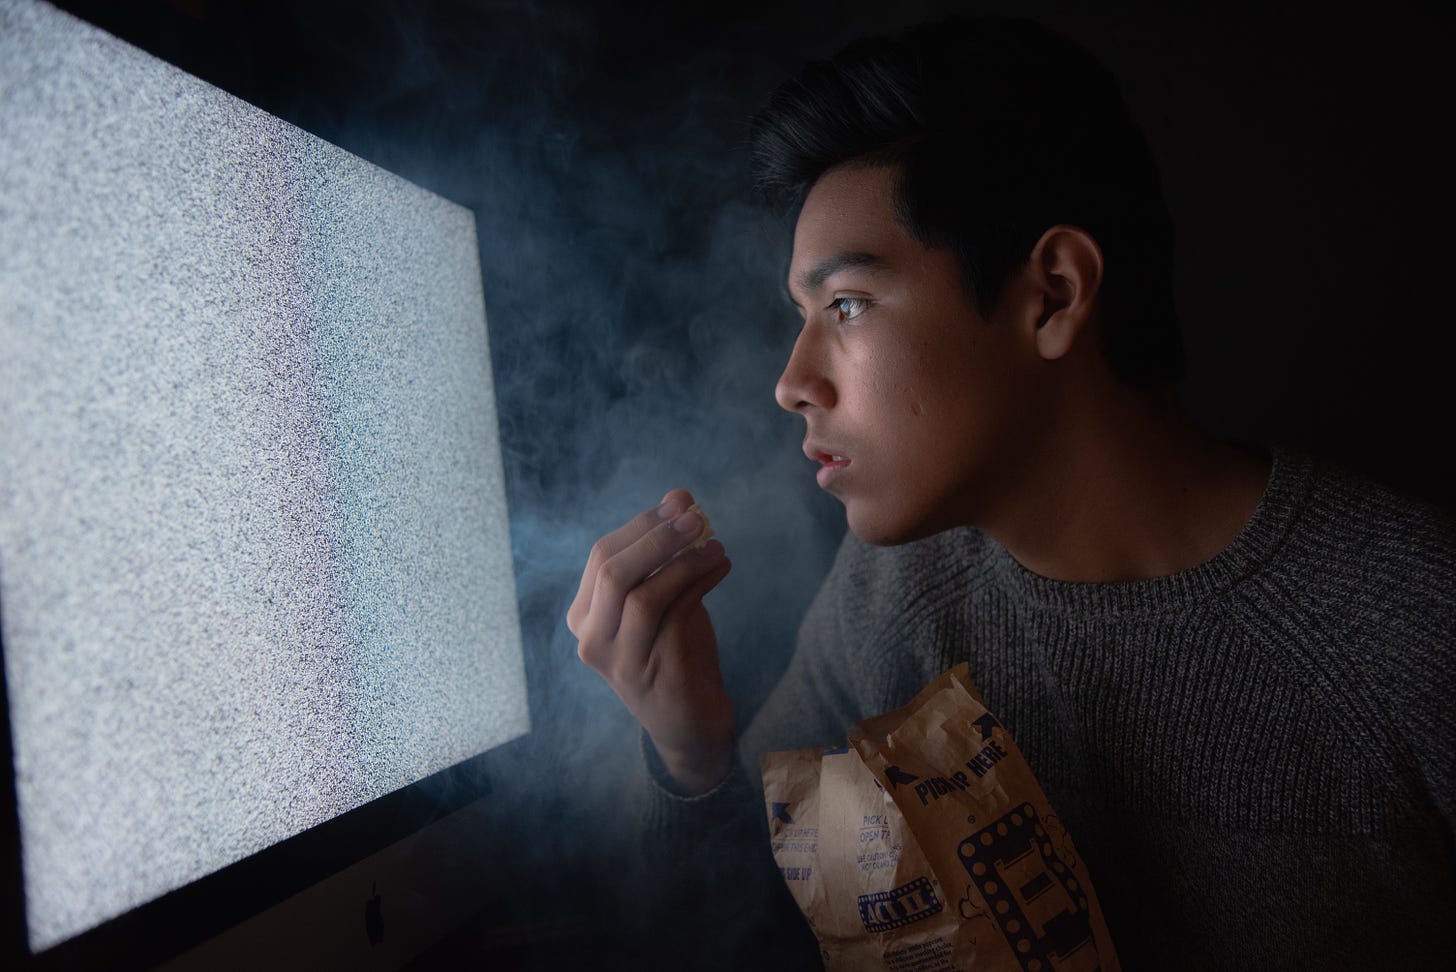 A man stares at a TV screen in a dark room while eating popcorn.